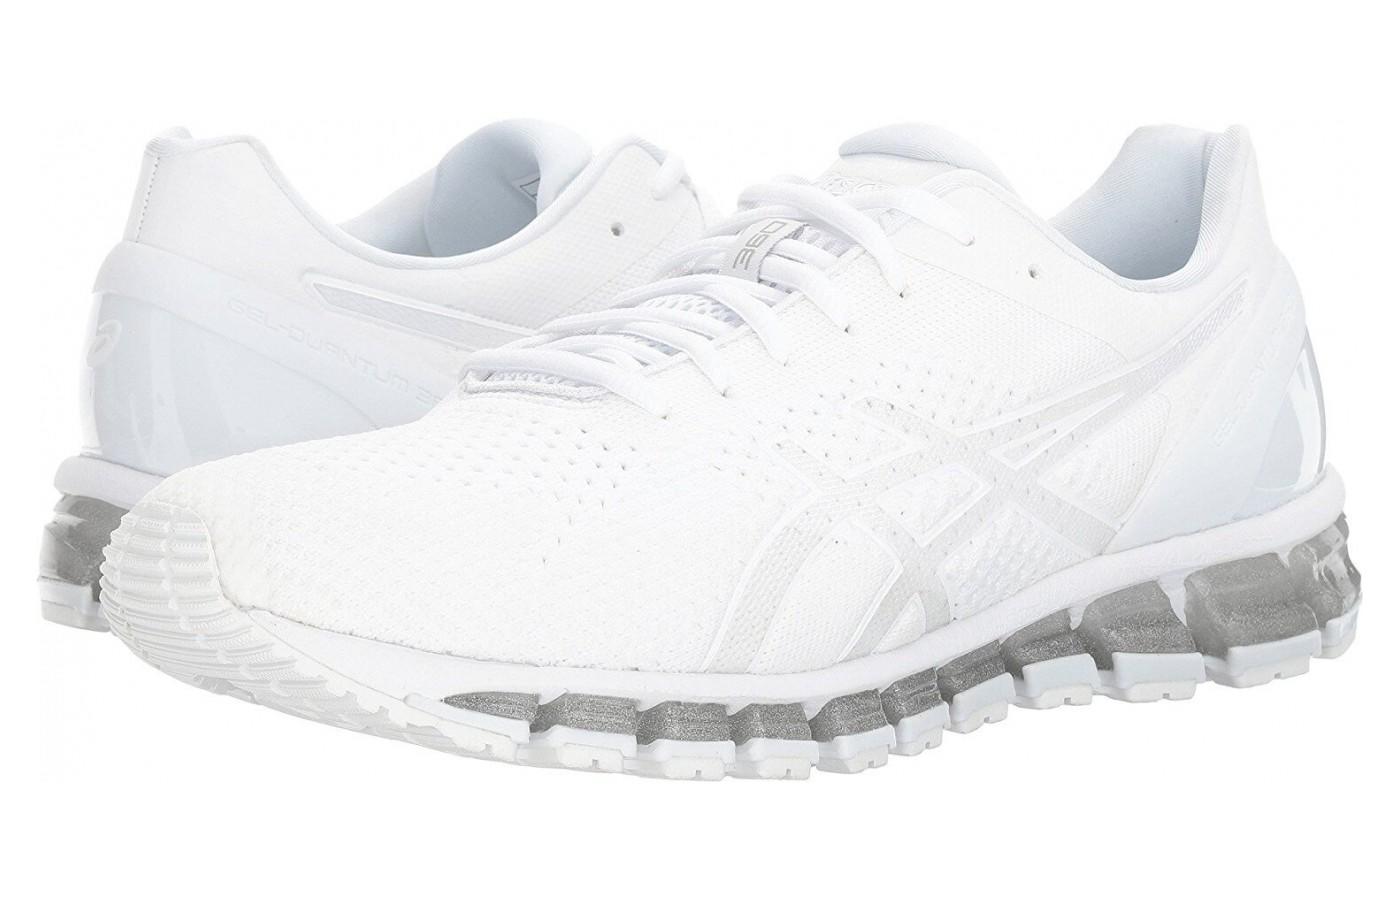 The Asics Gel Quantum 360 Knit has gel cushioning in both the rearfoot and forefoot